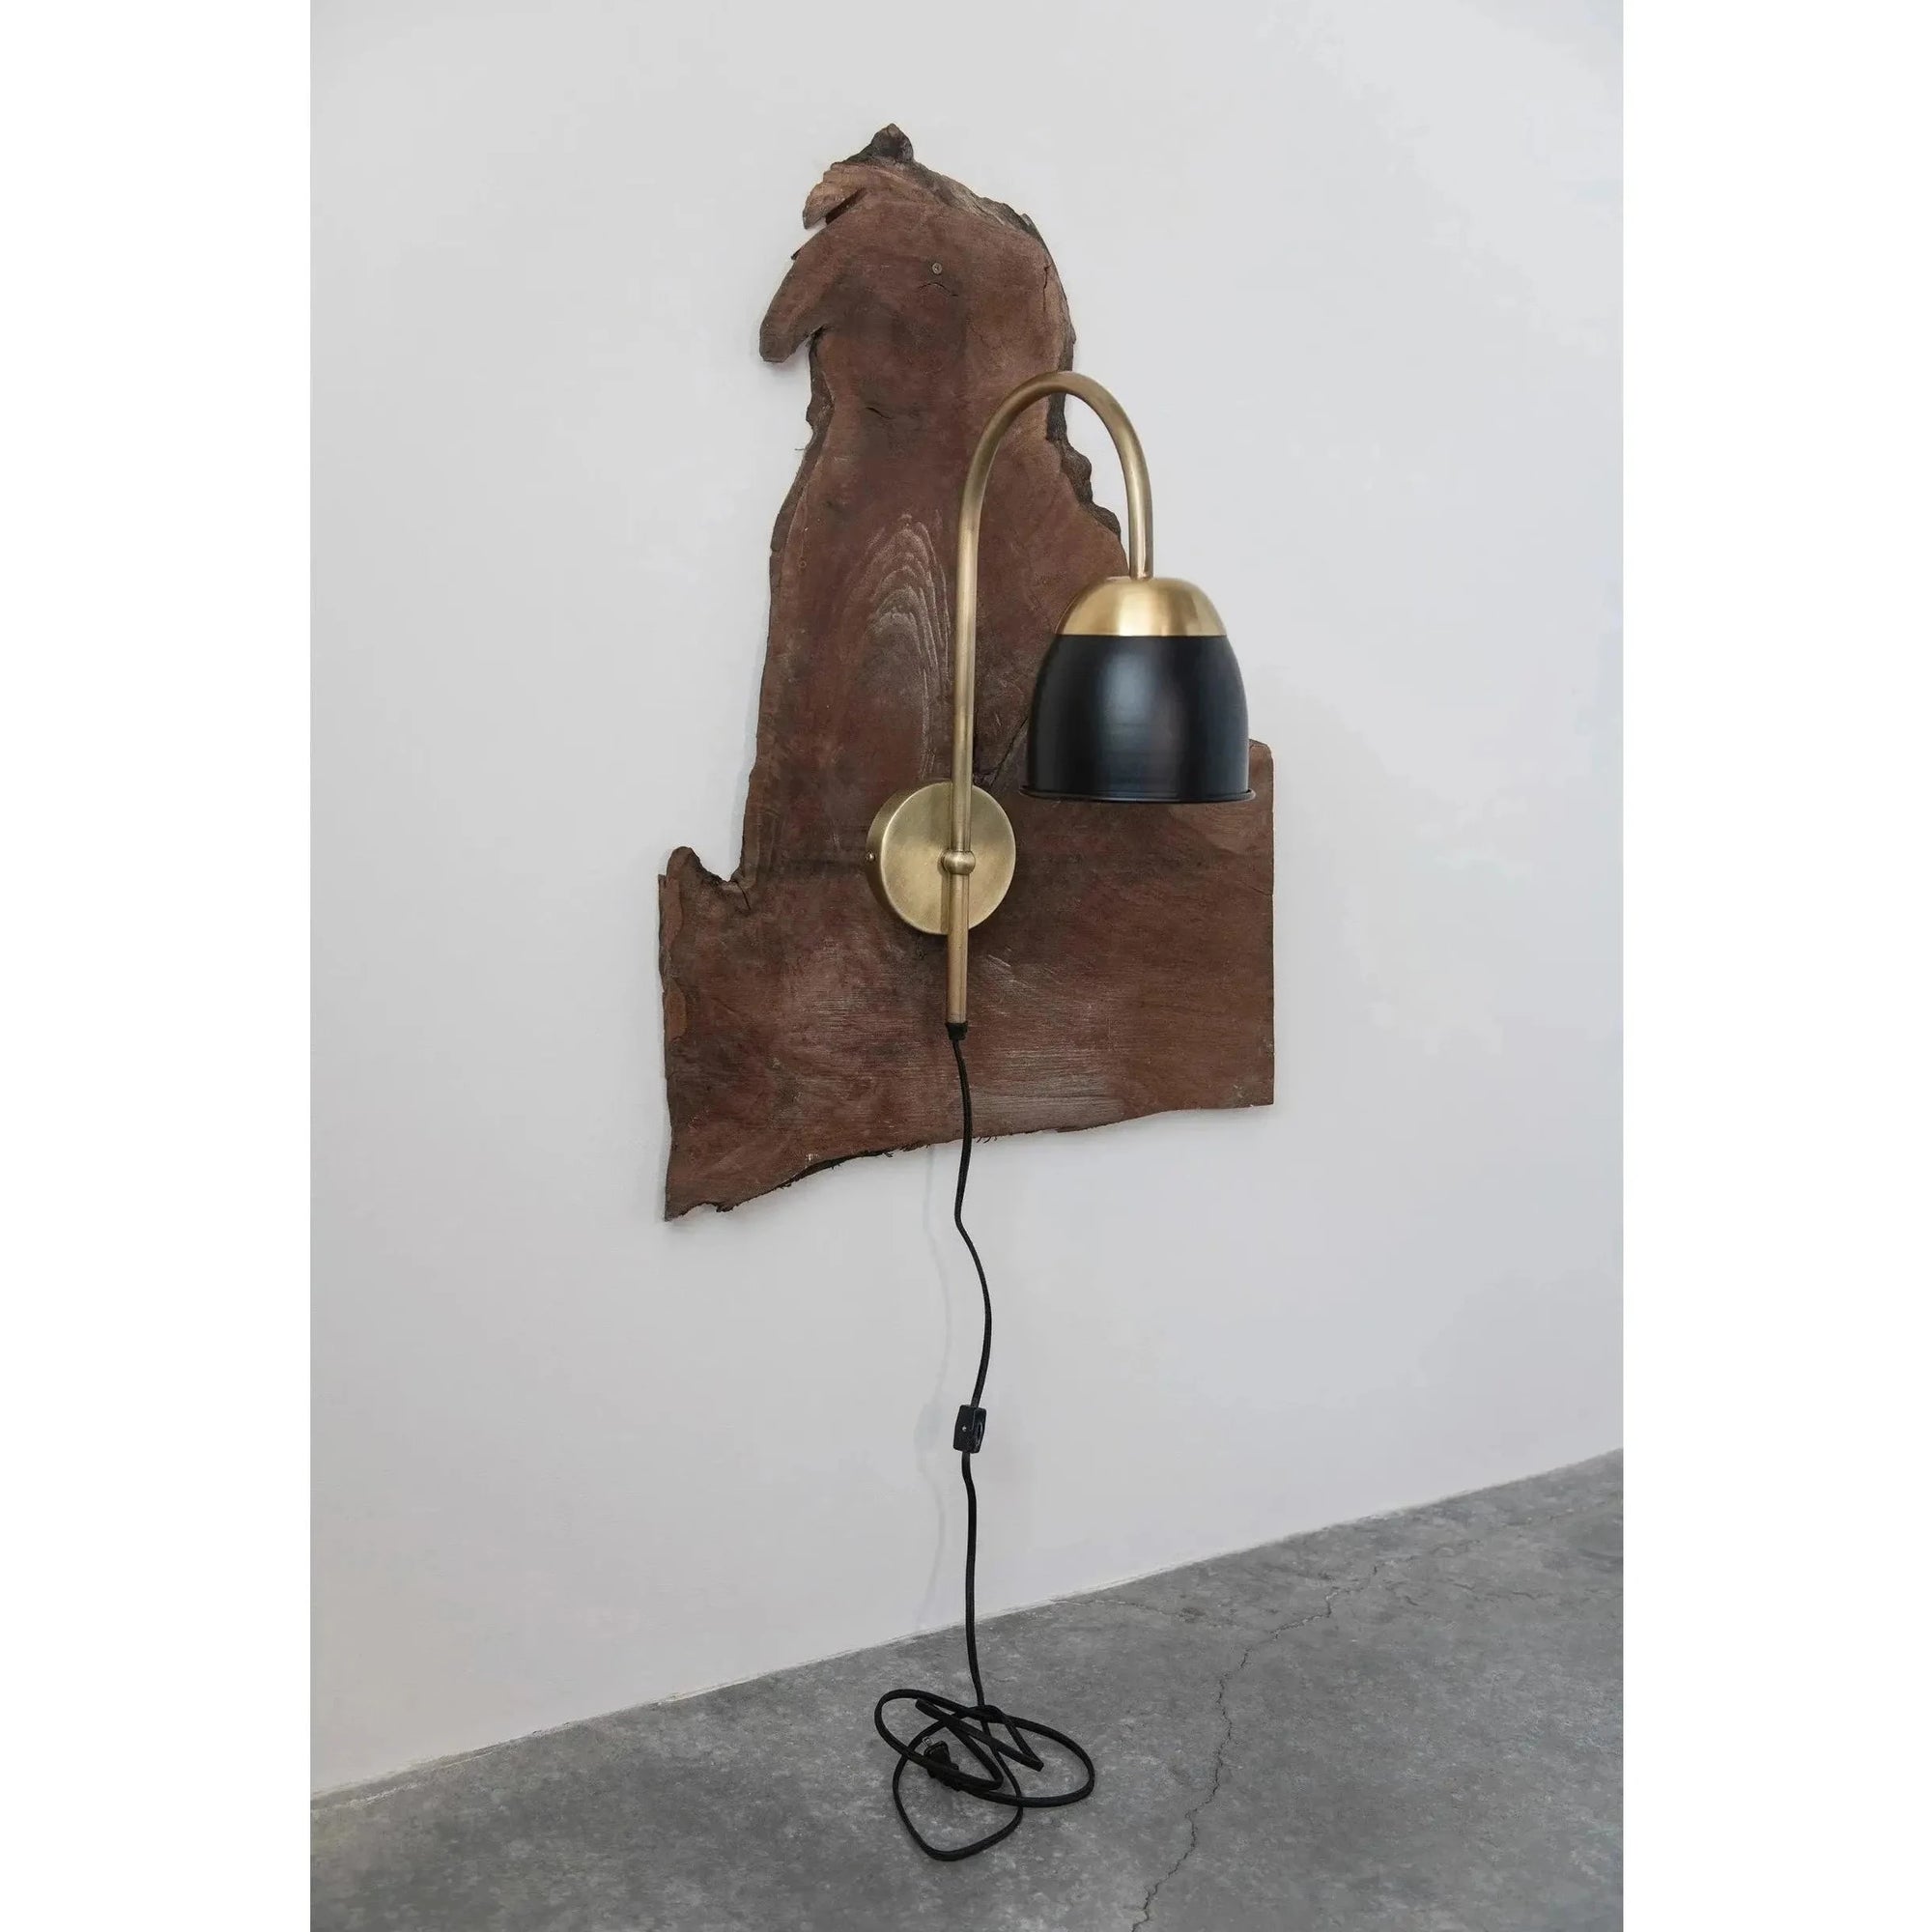 Cottage Style Wall Sconce     | Industrial Farm Co